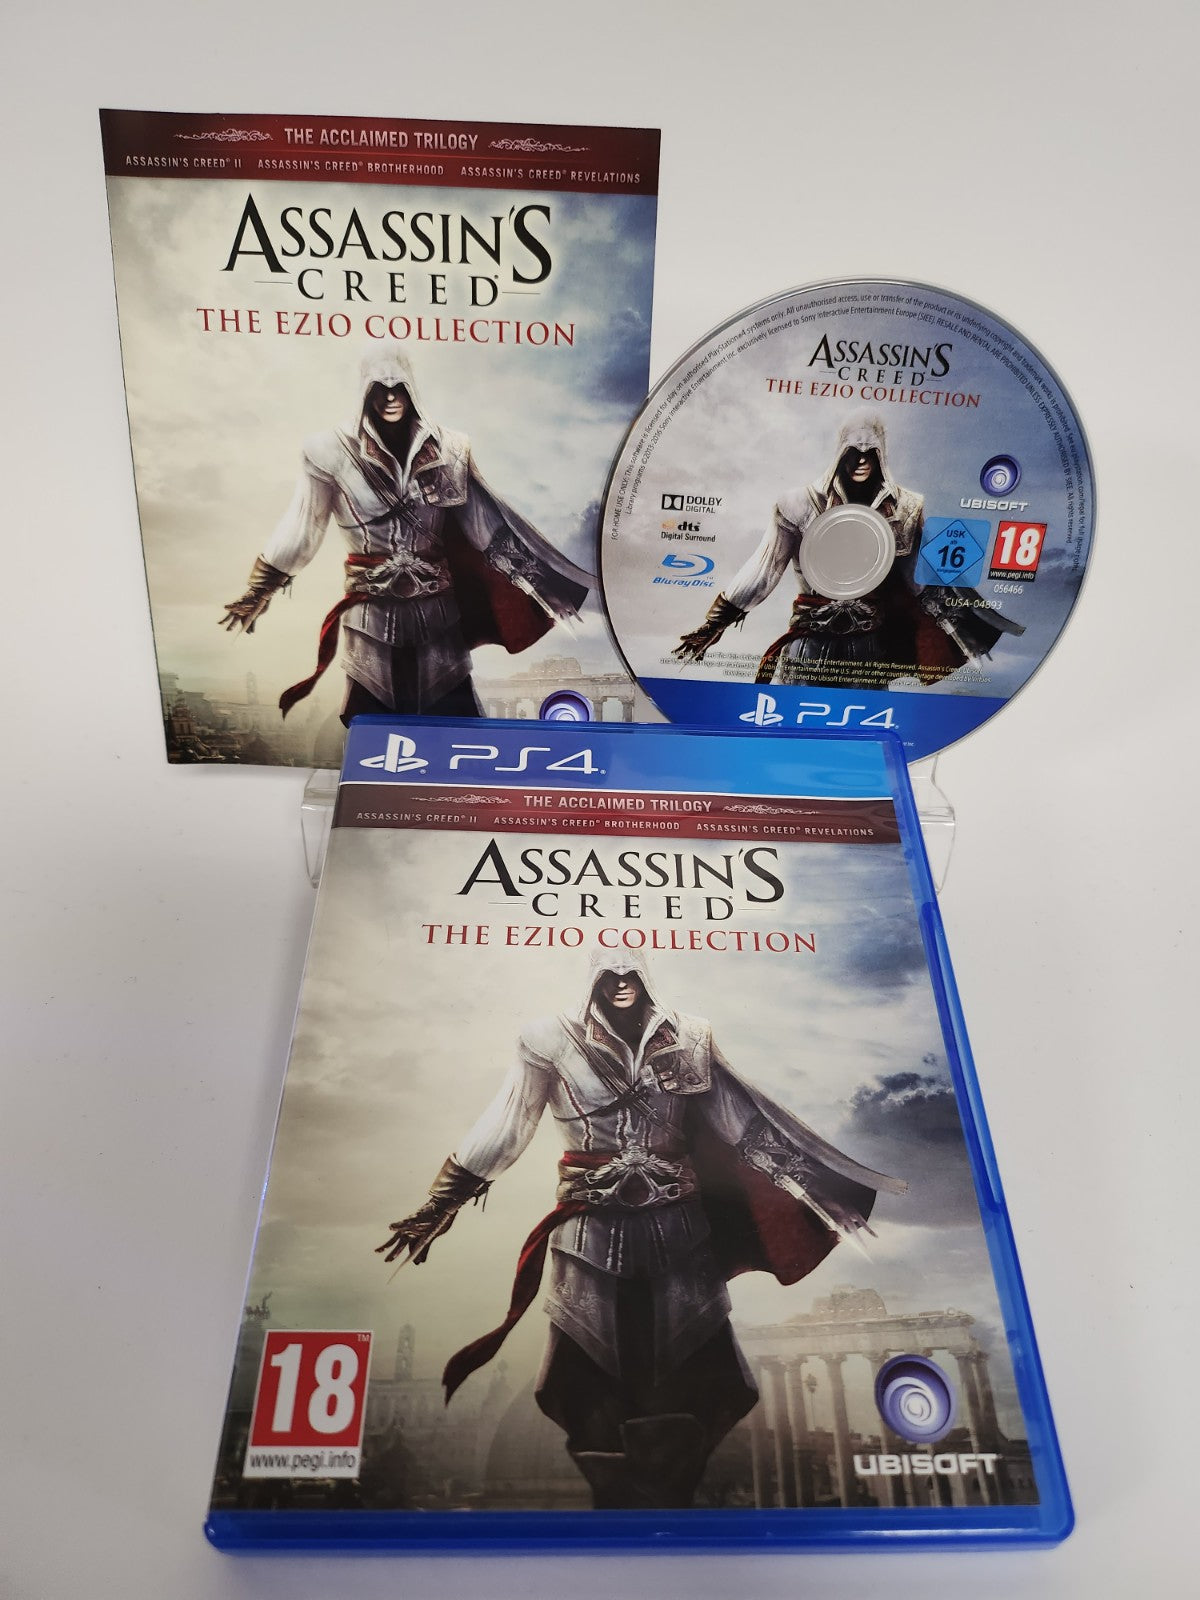 Assassin's Creed the Ezio Collection Playstation 4